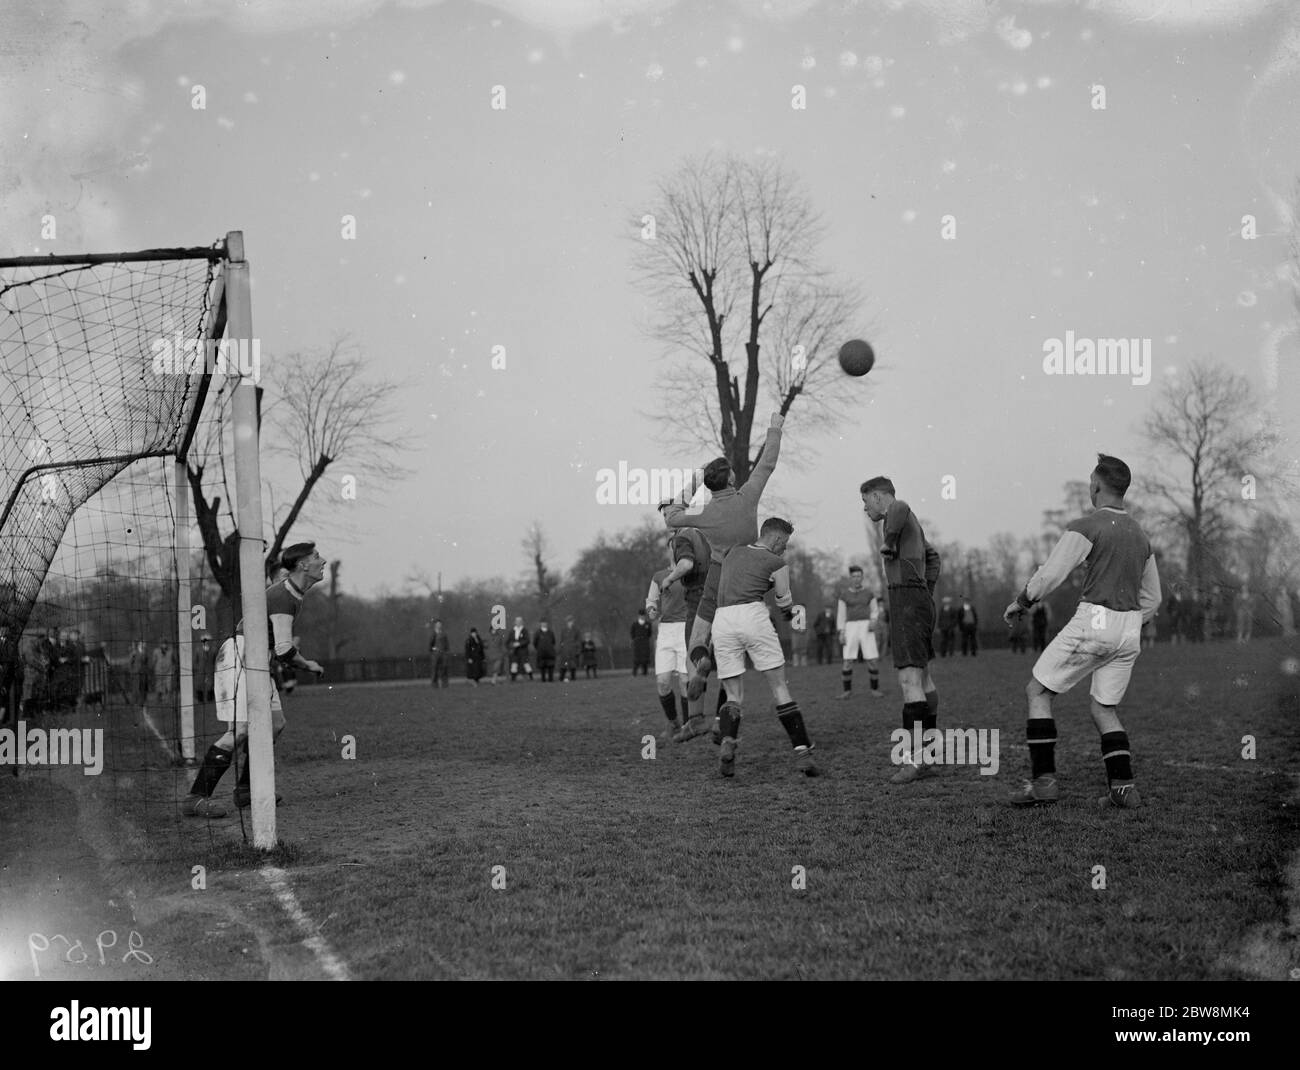 Bexley vs. Royal Ulster Rifles - Kent Amateur League - 21/01/36 Two players compete for an aerial ball . 1936 Stock Photo